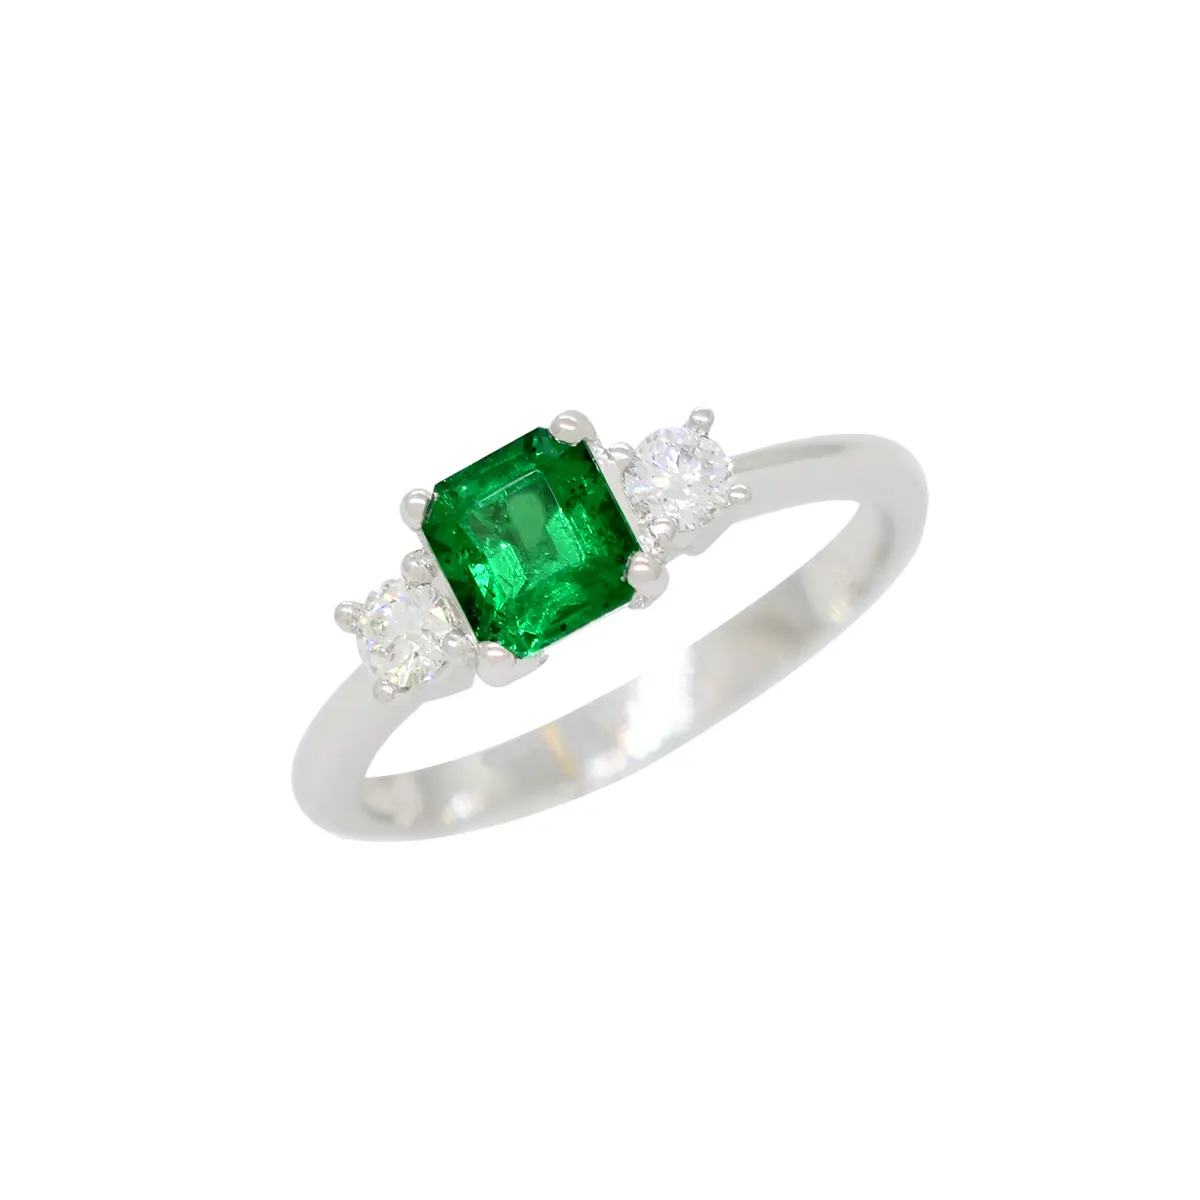 Emerald Collection | Emerald Rings | Queen Emerald